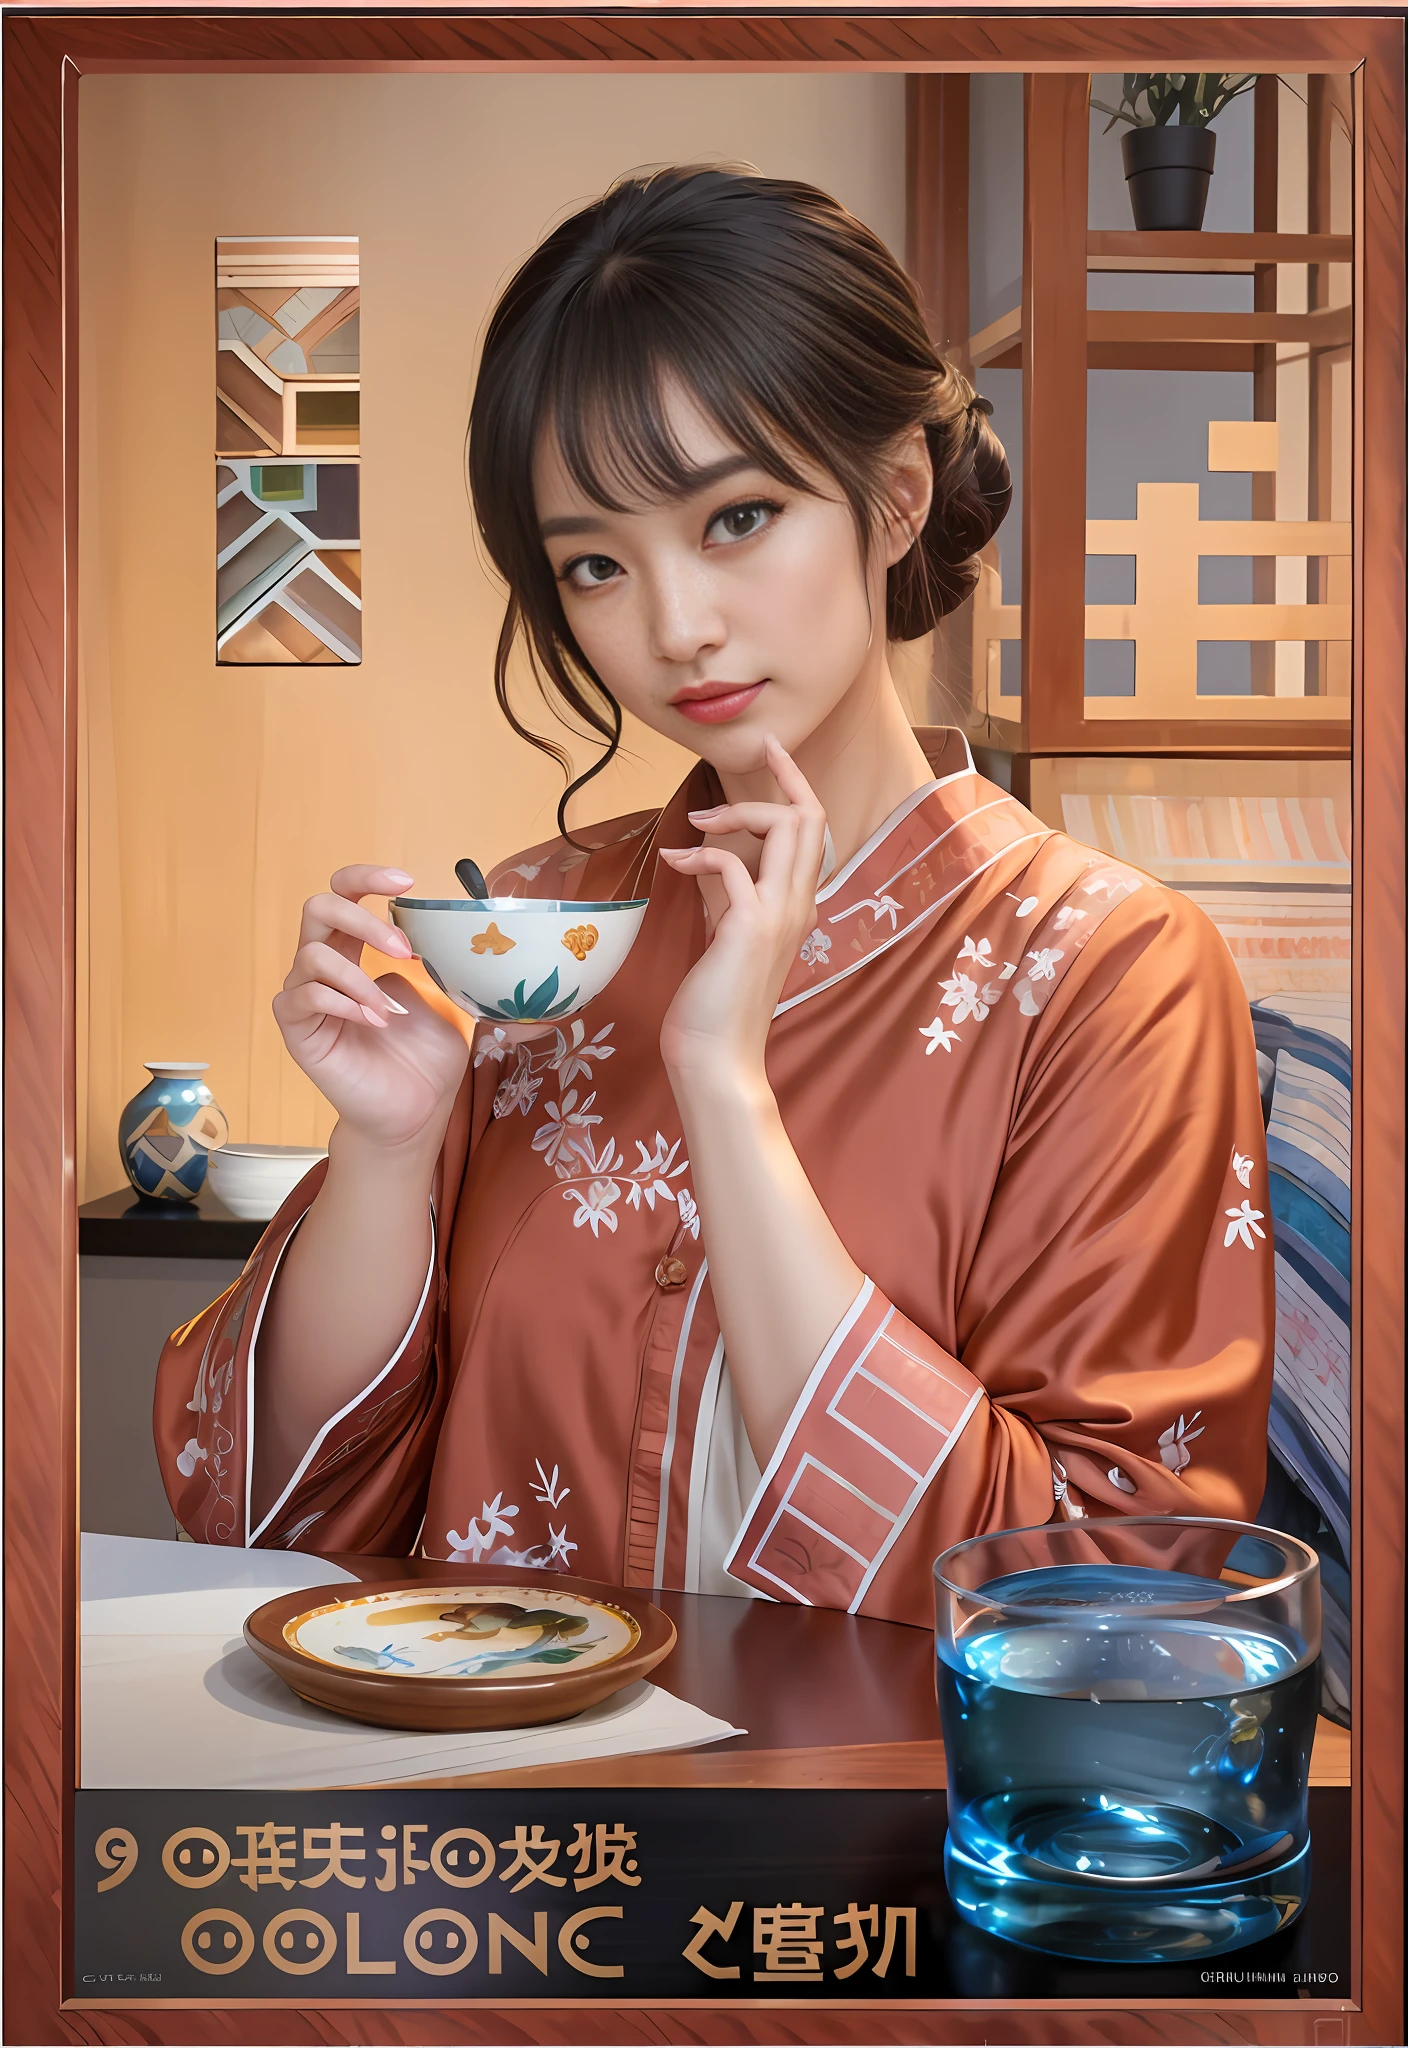 (dark shot:1.4), 80mm, (dark shot:1.4), 80mm, epic realistic, painting of a concubine with Chinese features, gorgeous fur,intricately detailed gorgeous cheongsam,by range murata, stunning, matted, paul gauguin, van gogh, art by greg rutkowski and artgerm, soft cinematic light, adobe lightroom, photolab, hdr, intricate, highly detailed, (depth of field:1.4), (dark shot:1.22), neutral colors, (hdr:1.4), (muted colors:1.4), (intricate), (artstation:1.2), hyperdetailed, dramatic, intricate details, (technicolor:0.9), (rutkowski:0.8), cinematic, detailed, soft light, sharp, exposure blend, medium shot, bokeh, (hdr:1.4), high contrast, (cinematic, teal and orange:0.85), (muted colors, dim colors, soothing tones:1.3), low saturation, (hyperdetailed:1.2), (noir:0.4), soft light, sharp, exposure blend, medium shot, bokeh, (hdr:1.4), high contrast, (cinematic, teal and orange:0.85), (muted colors, dim colors, soothing tones:1.3), low saturation, (hyperdetailed:1.2), (noir:0.4), (intricate details:1.12), hdr, (intricate details, hyperdetailed:1.15)